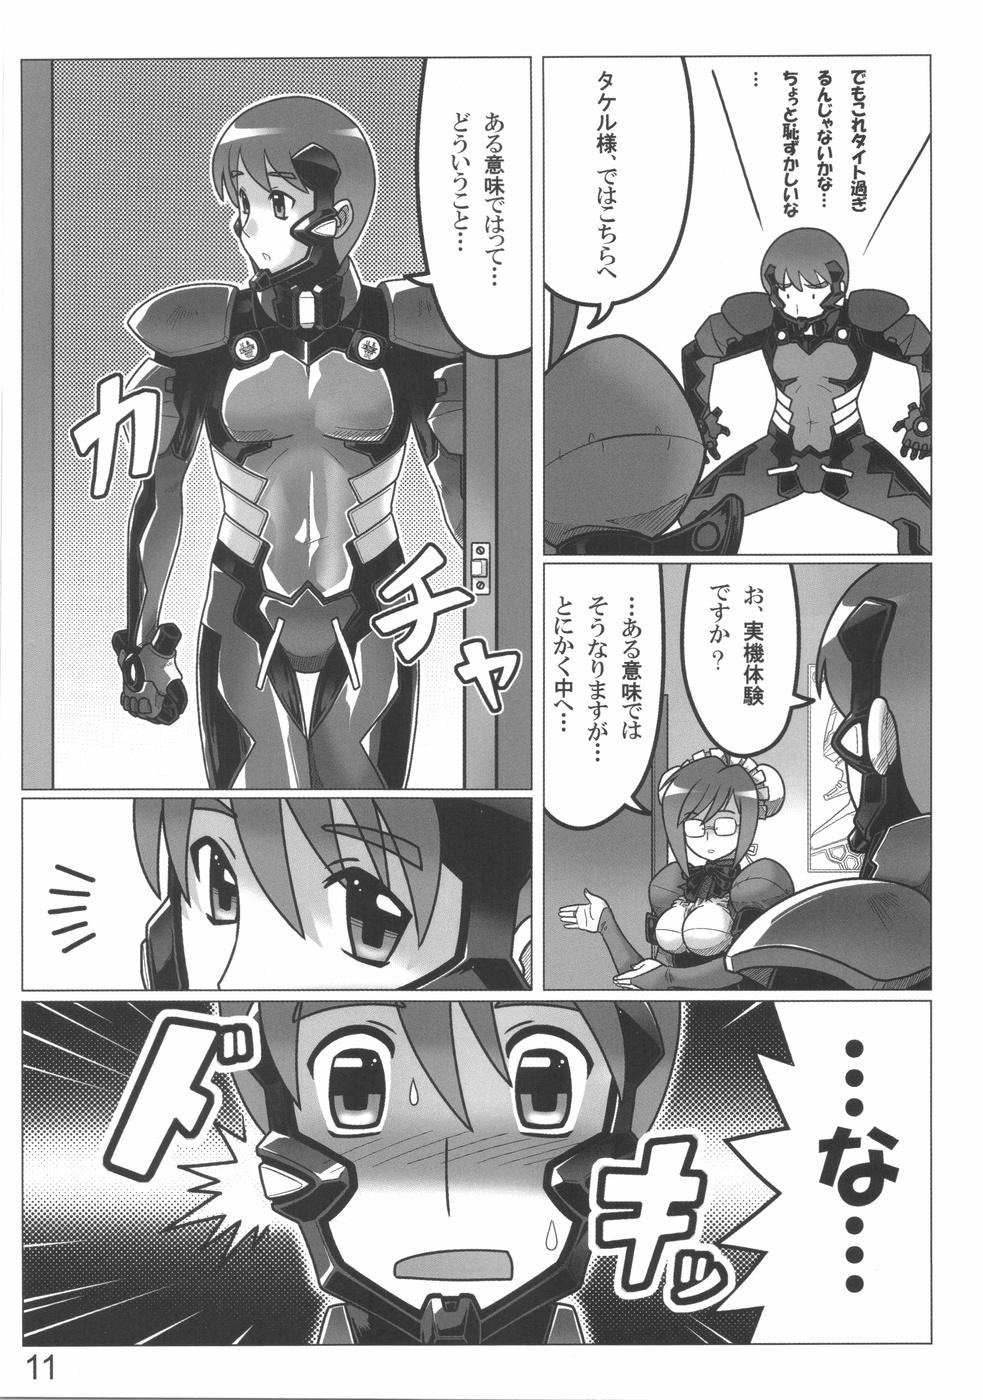 Her TWIN STRIKE - Muv luv Amatuer - Page 11